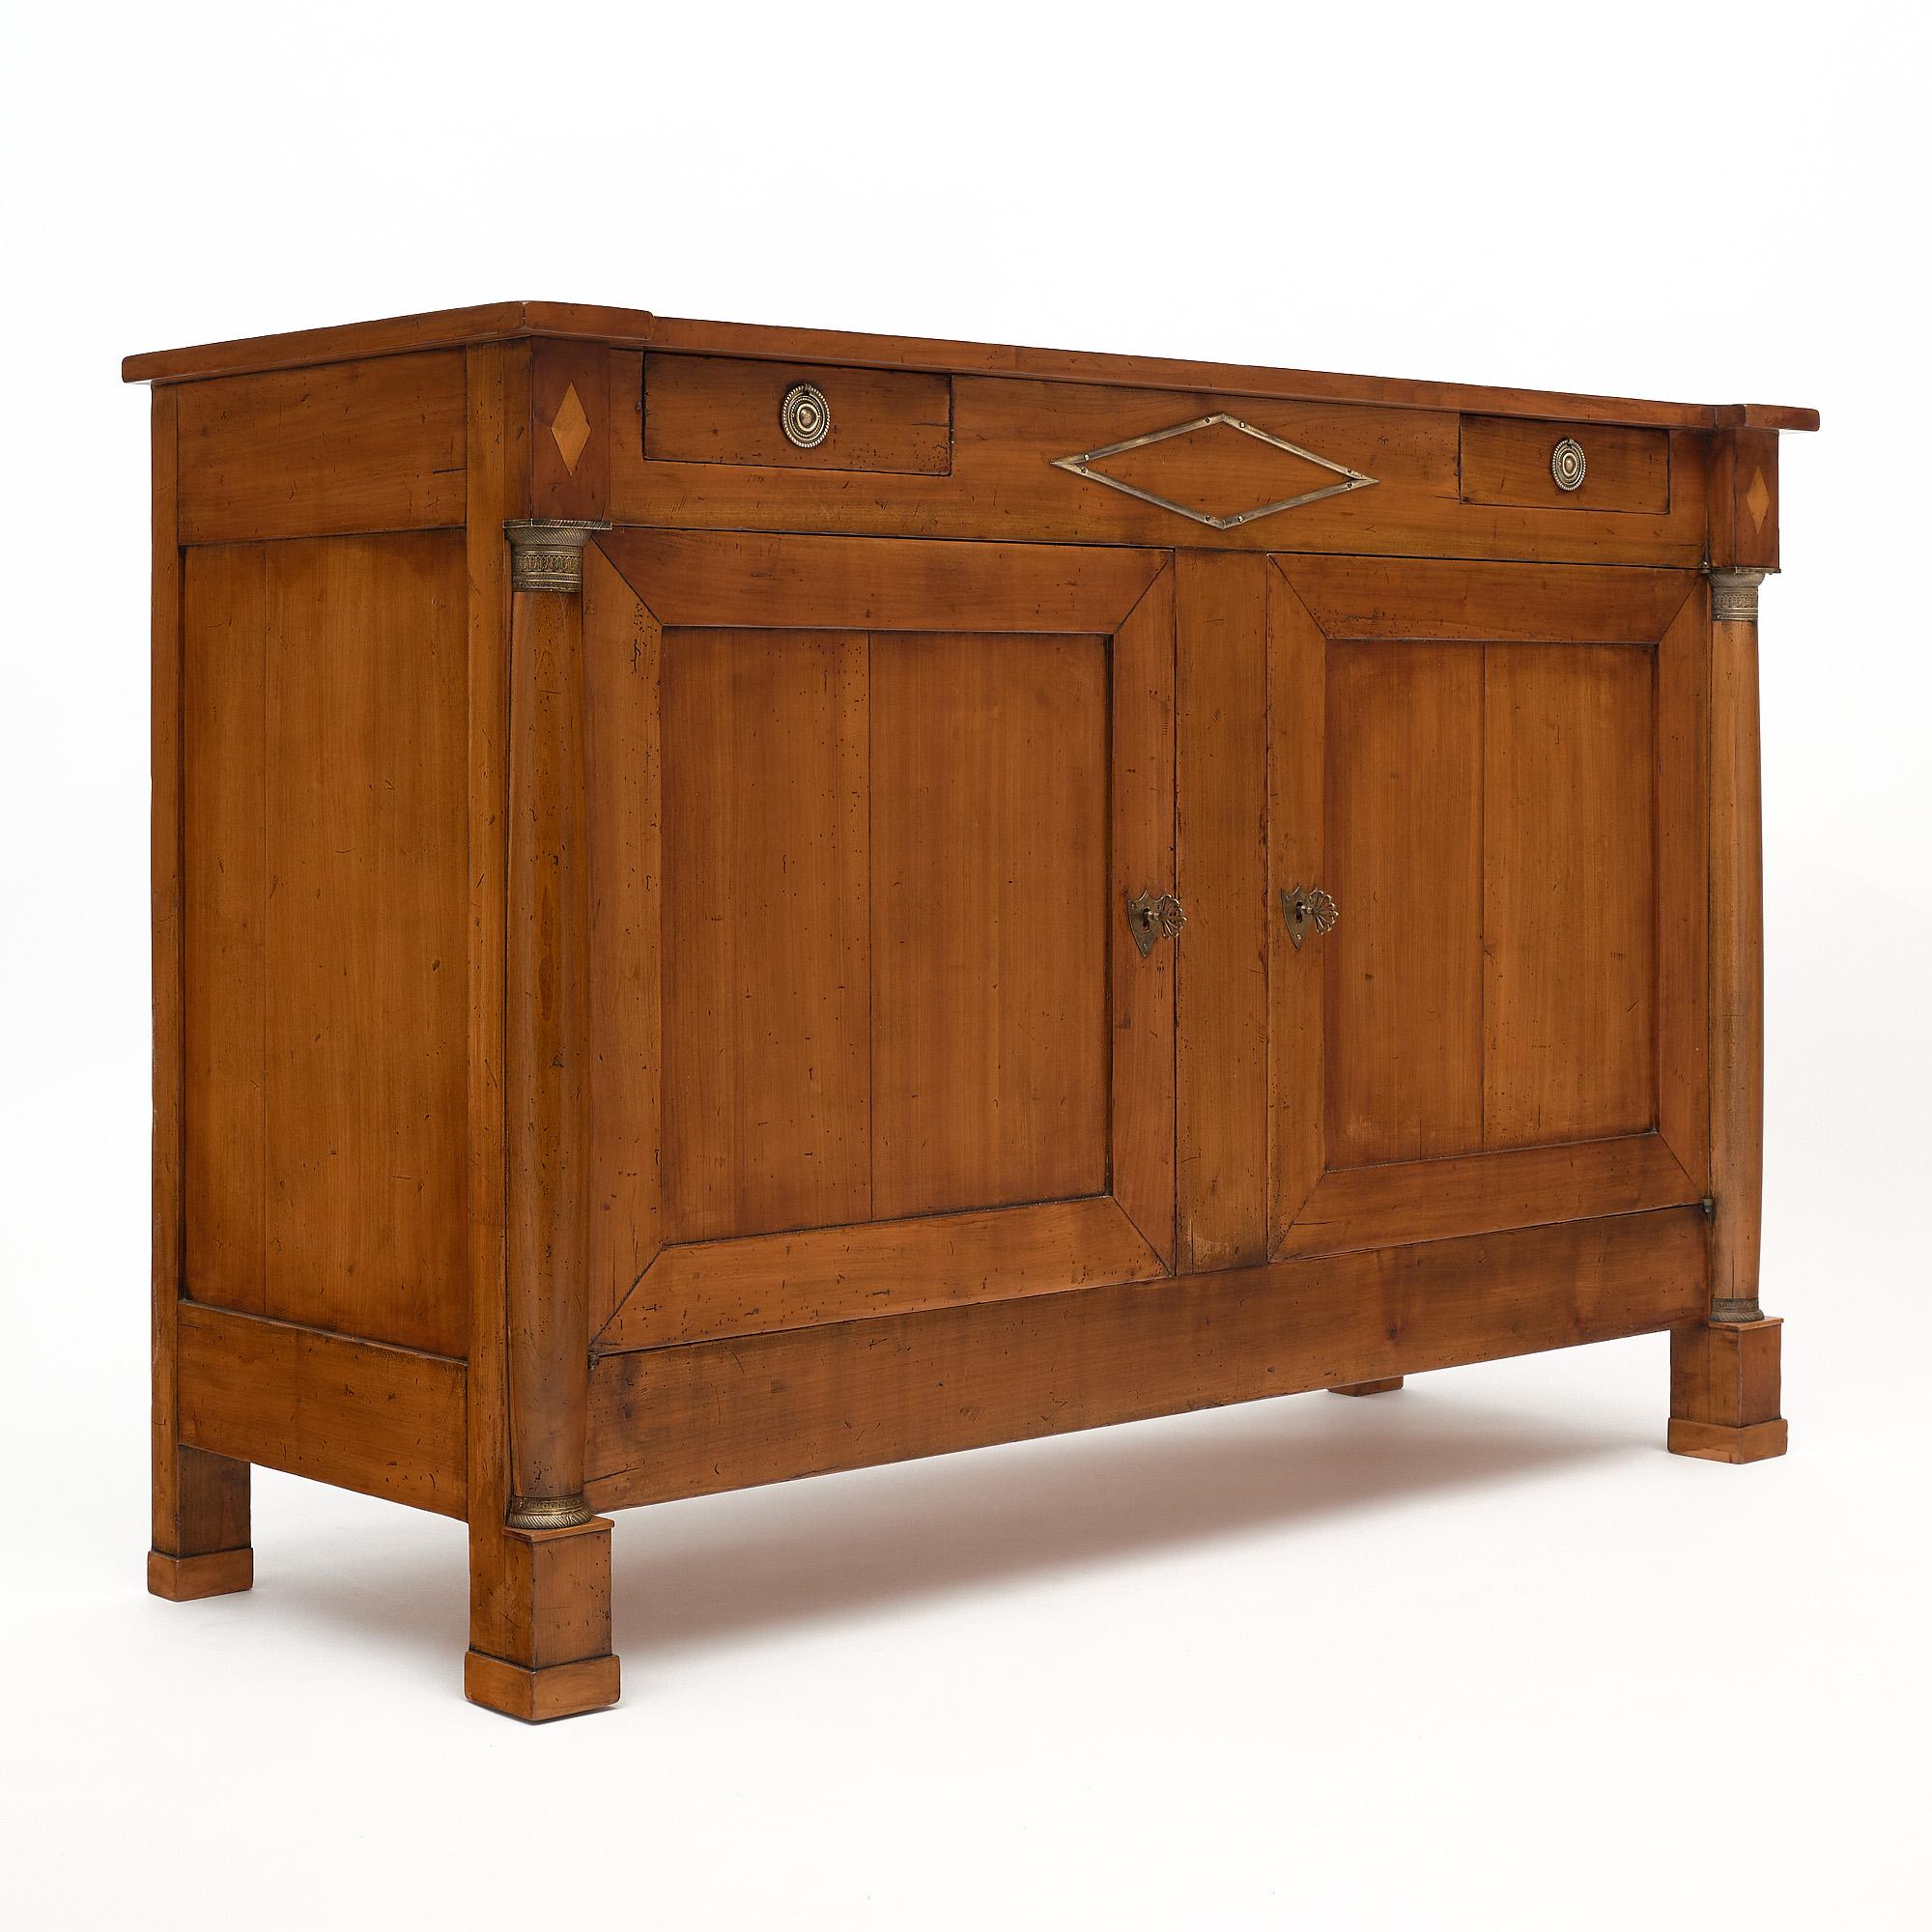 Buffet from France made of solid walnut with bronze detailing adorning the detached columns and two dovetailed drawers. There are also two doors that open to interior shelving.
